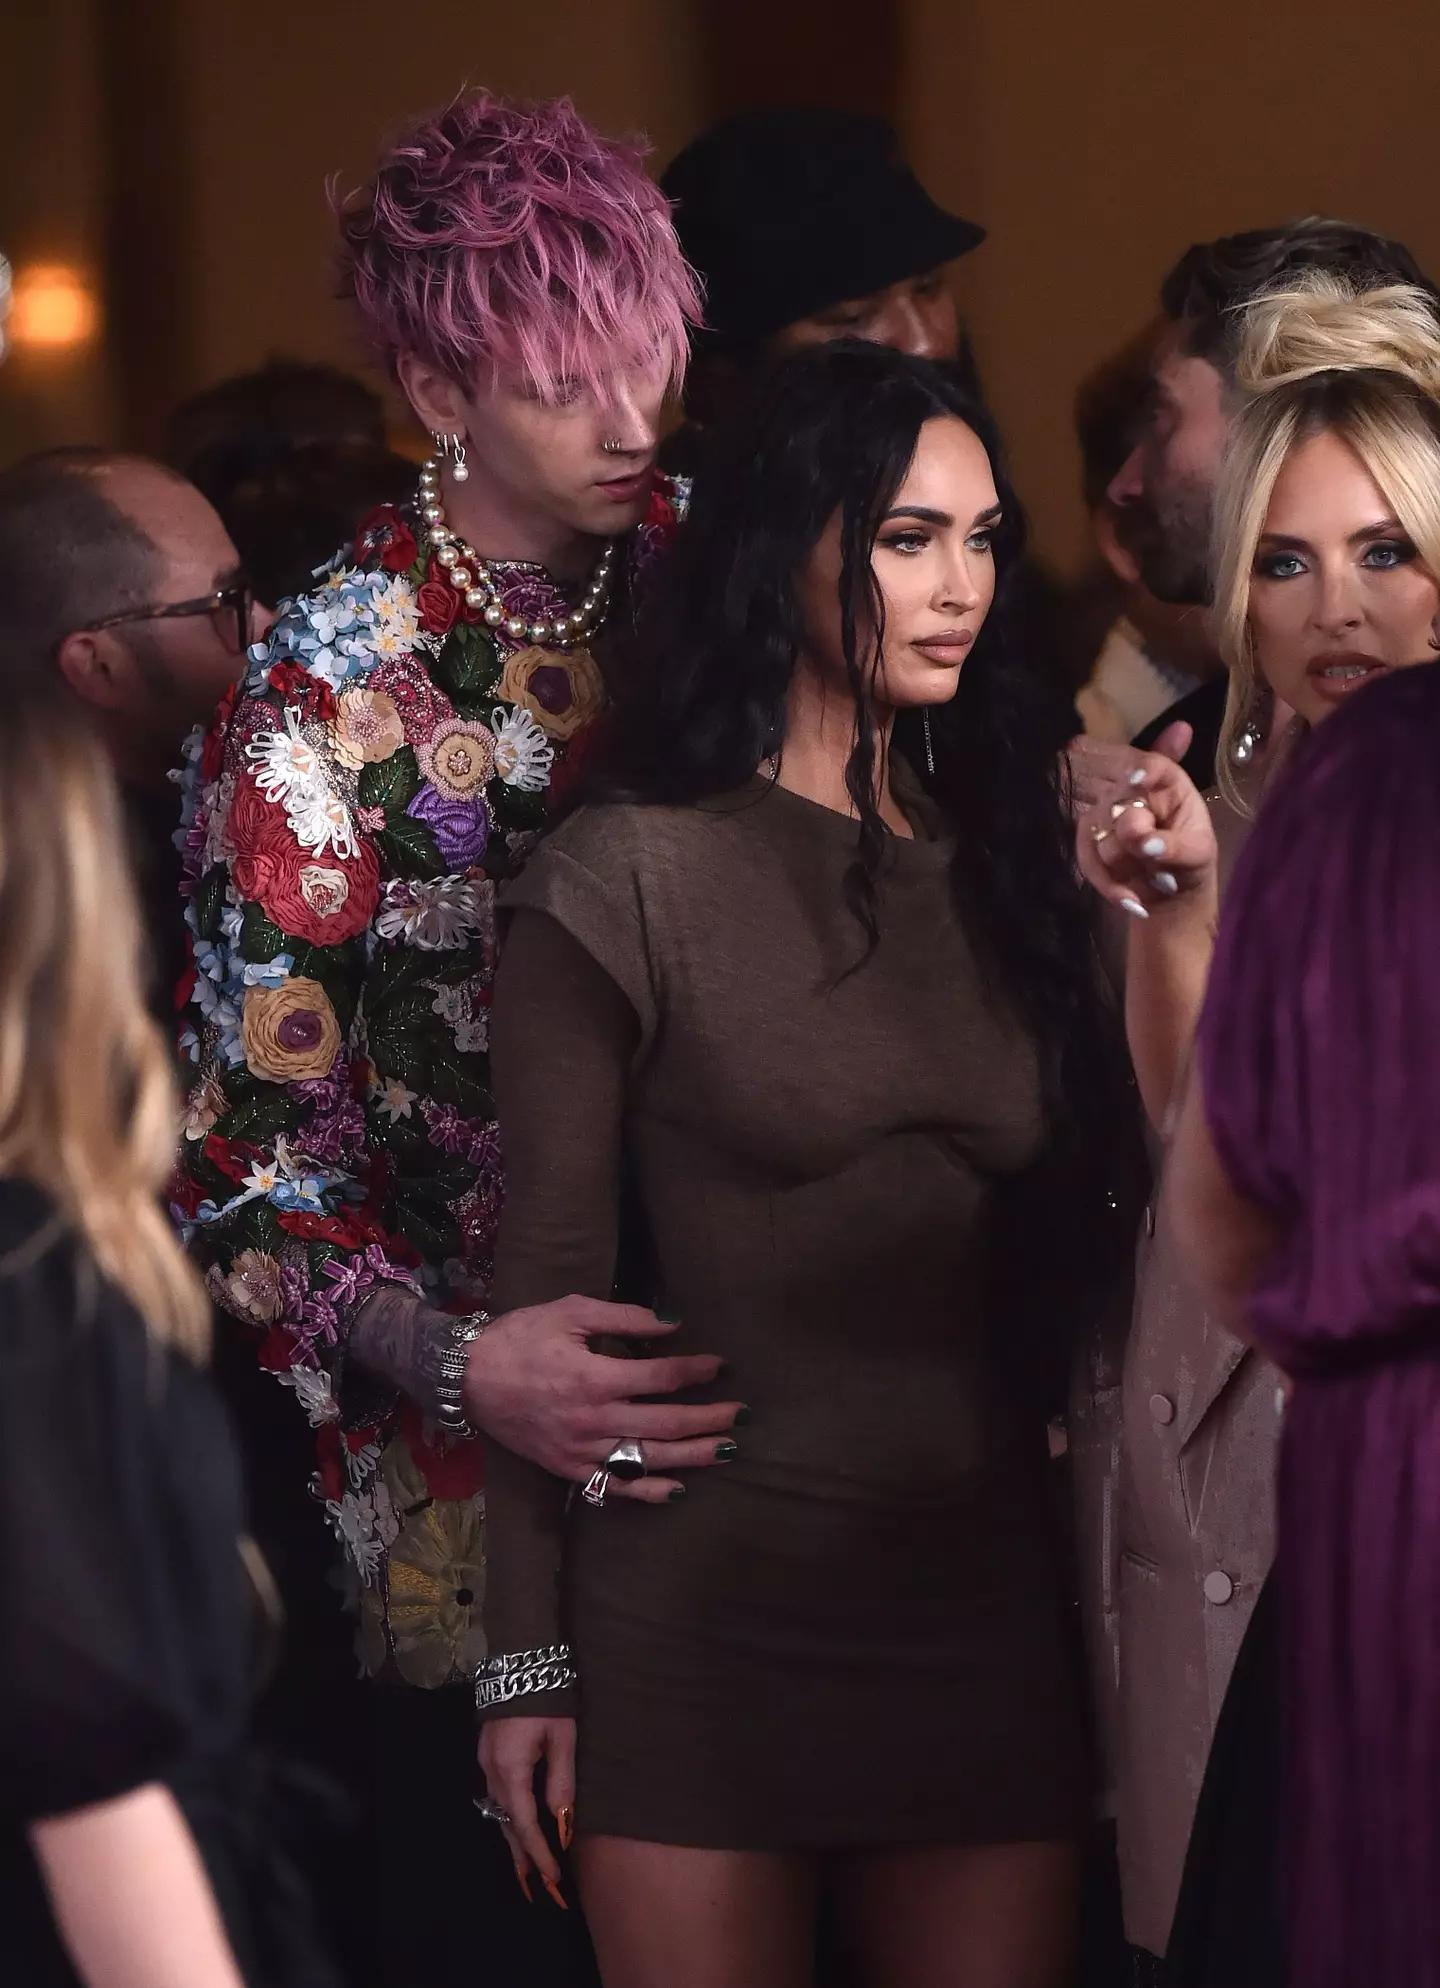 Machine Gun Kelly and Megan Fox's public display of affection towards one other at Daily Front Row's Fashion Awards contrasted greatly to their usual closeness.